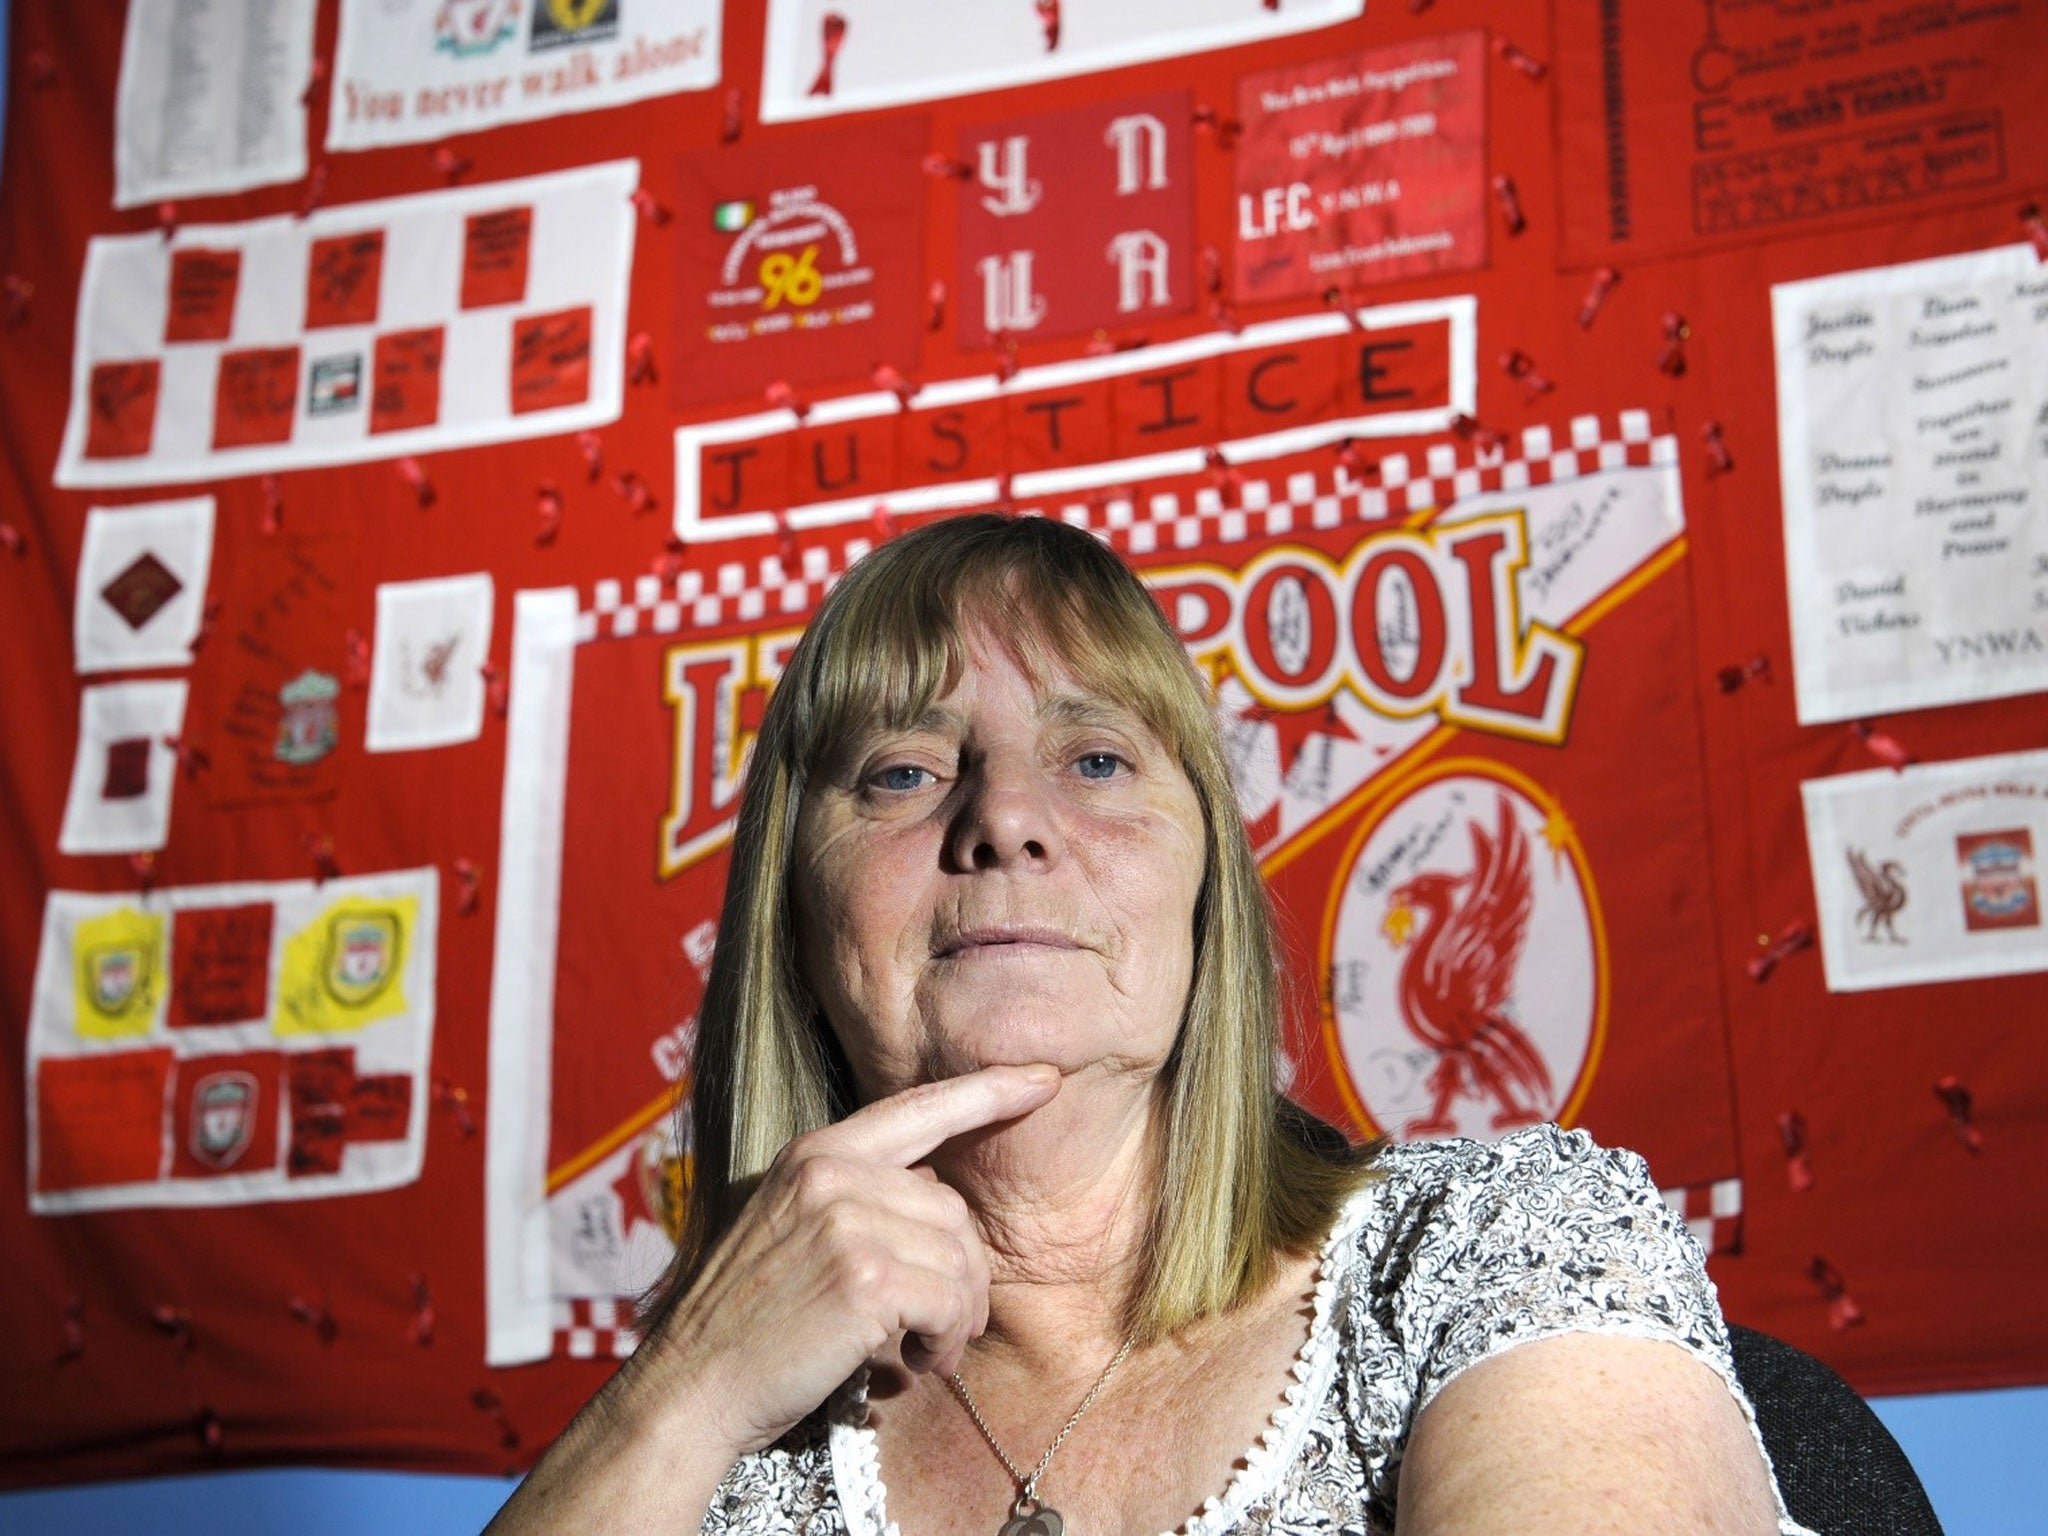 Margaret Aspinall, chair of the Hillsborough Family Support Group